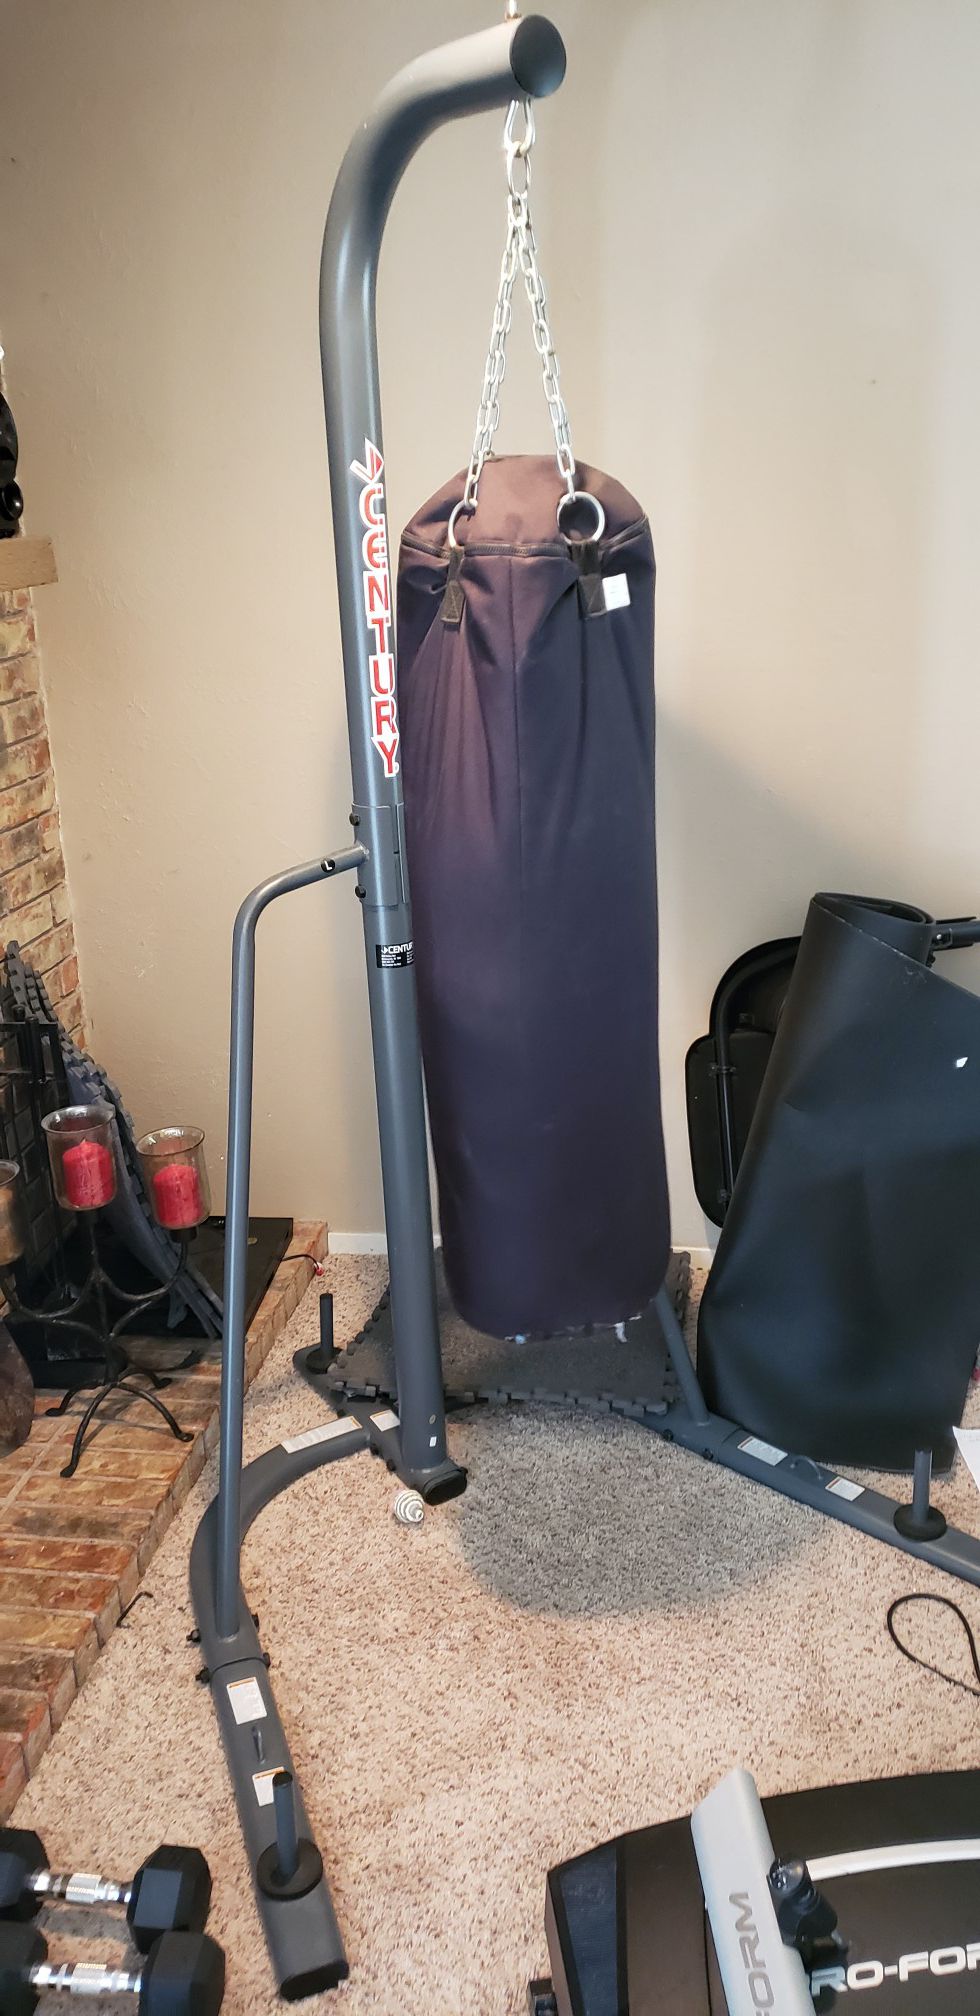 Century punching bag and Stand